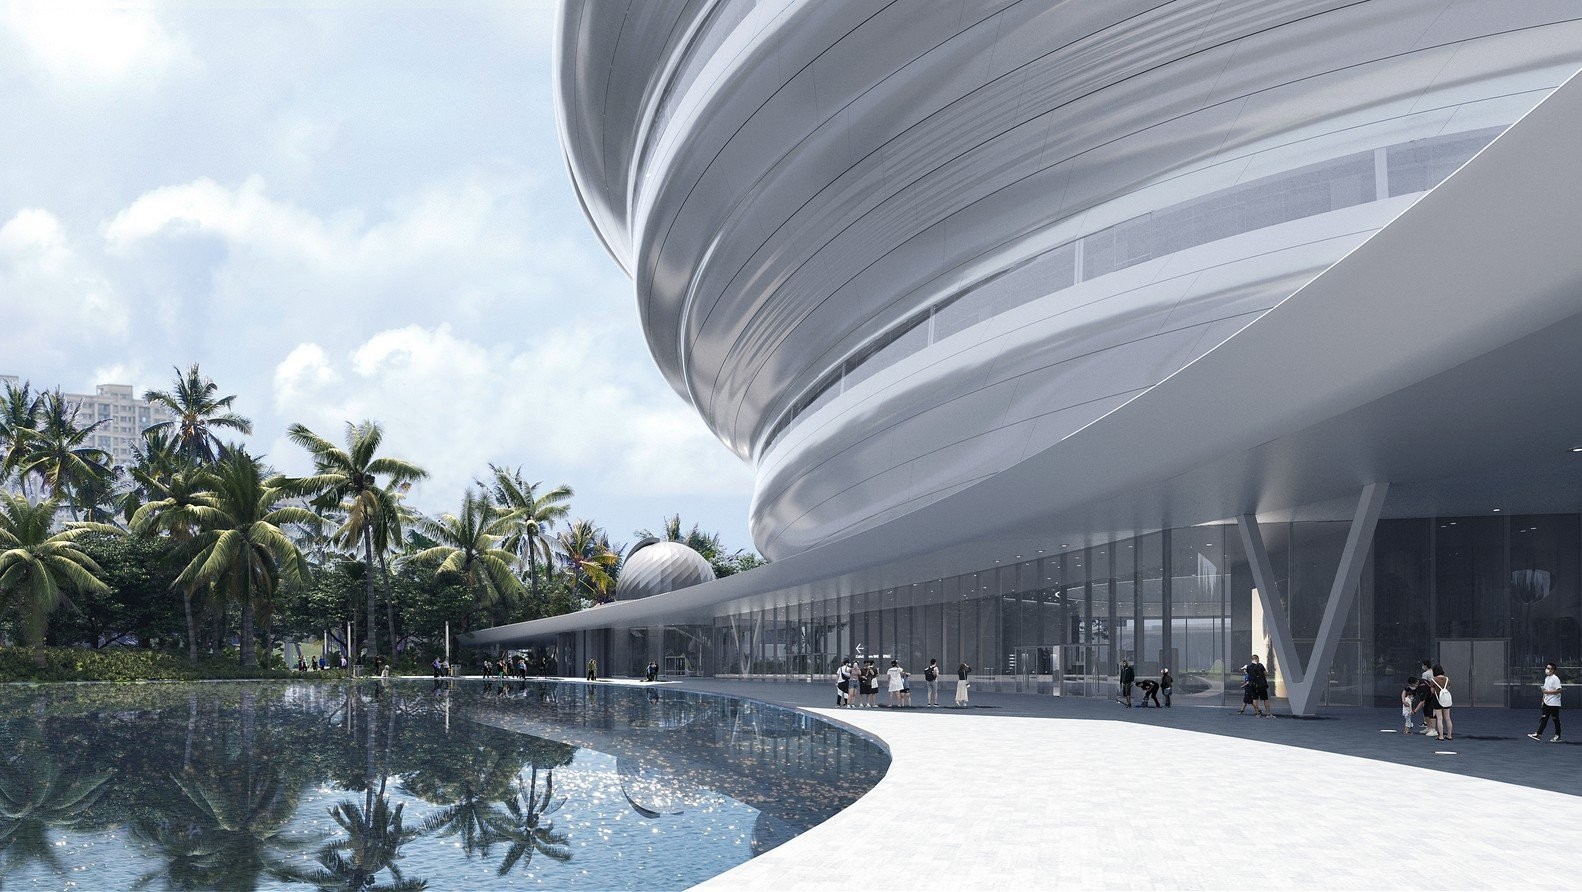 15-mad-hainan-science-and-technology-museum-canopy-grey-space.jpg